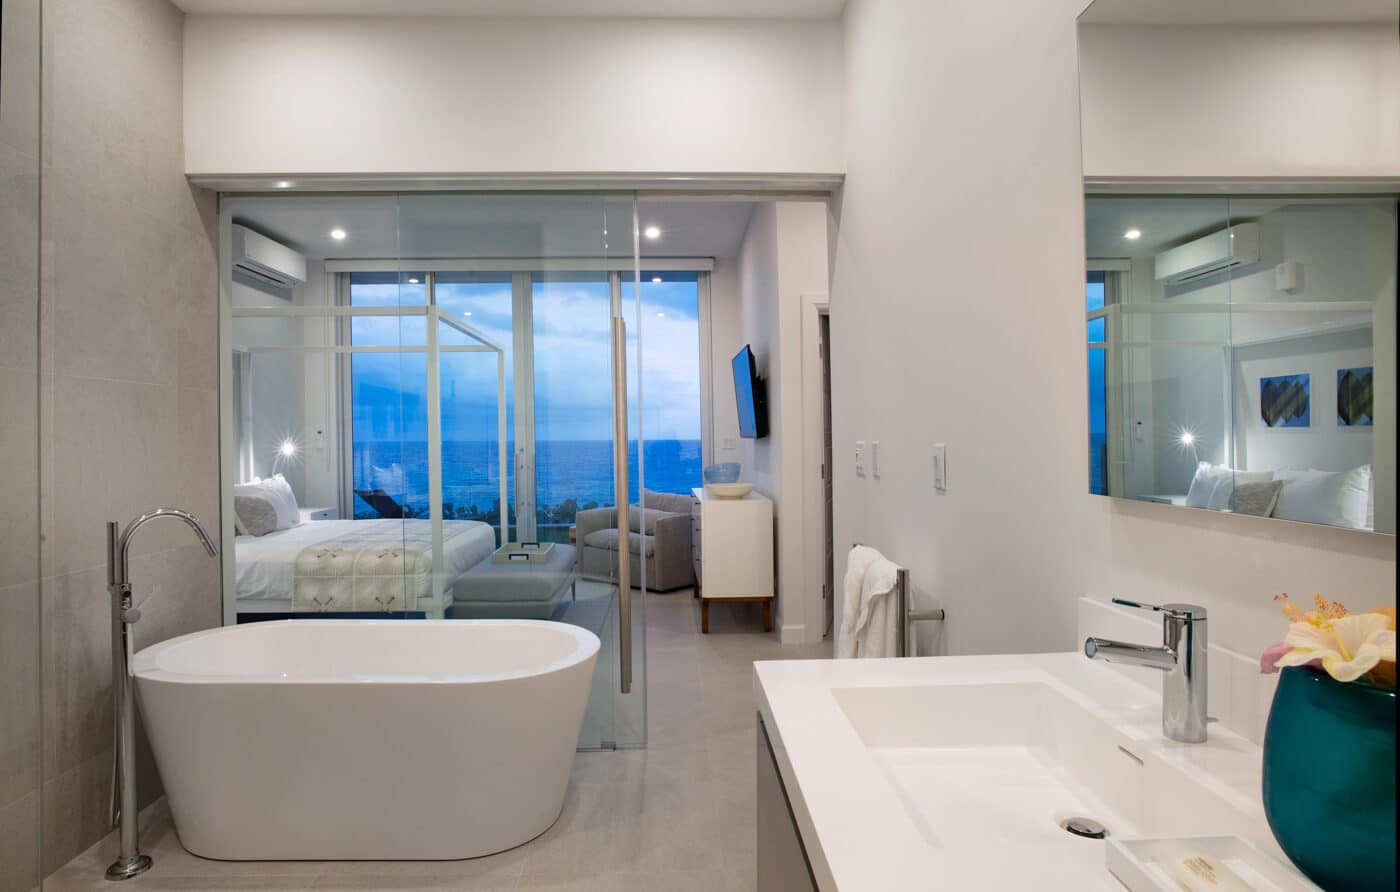 A bathroom connected to a bedroom with large glass doors.